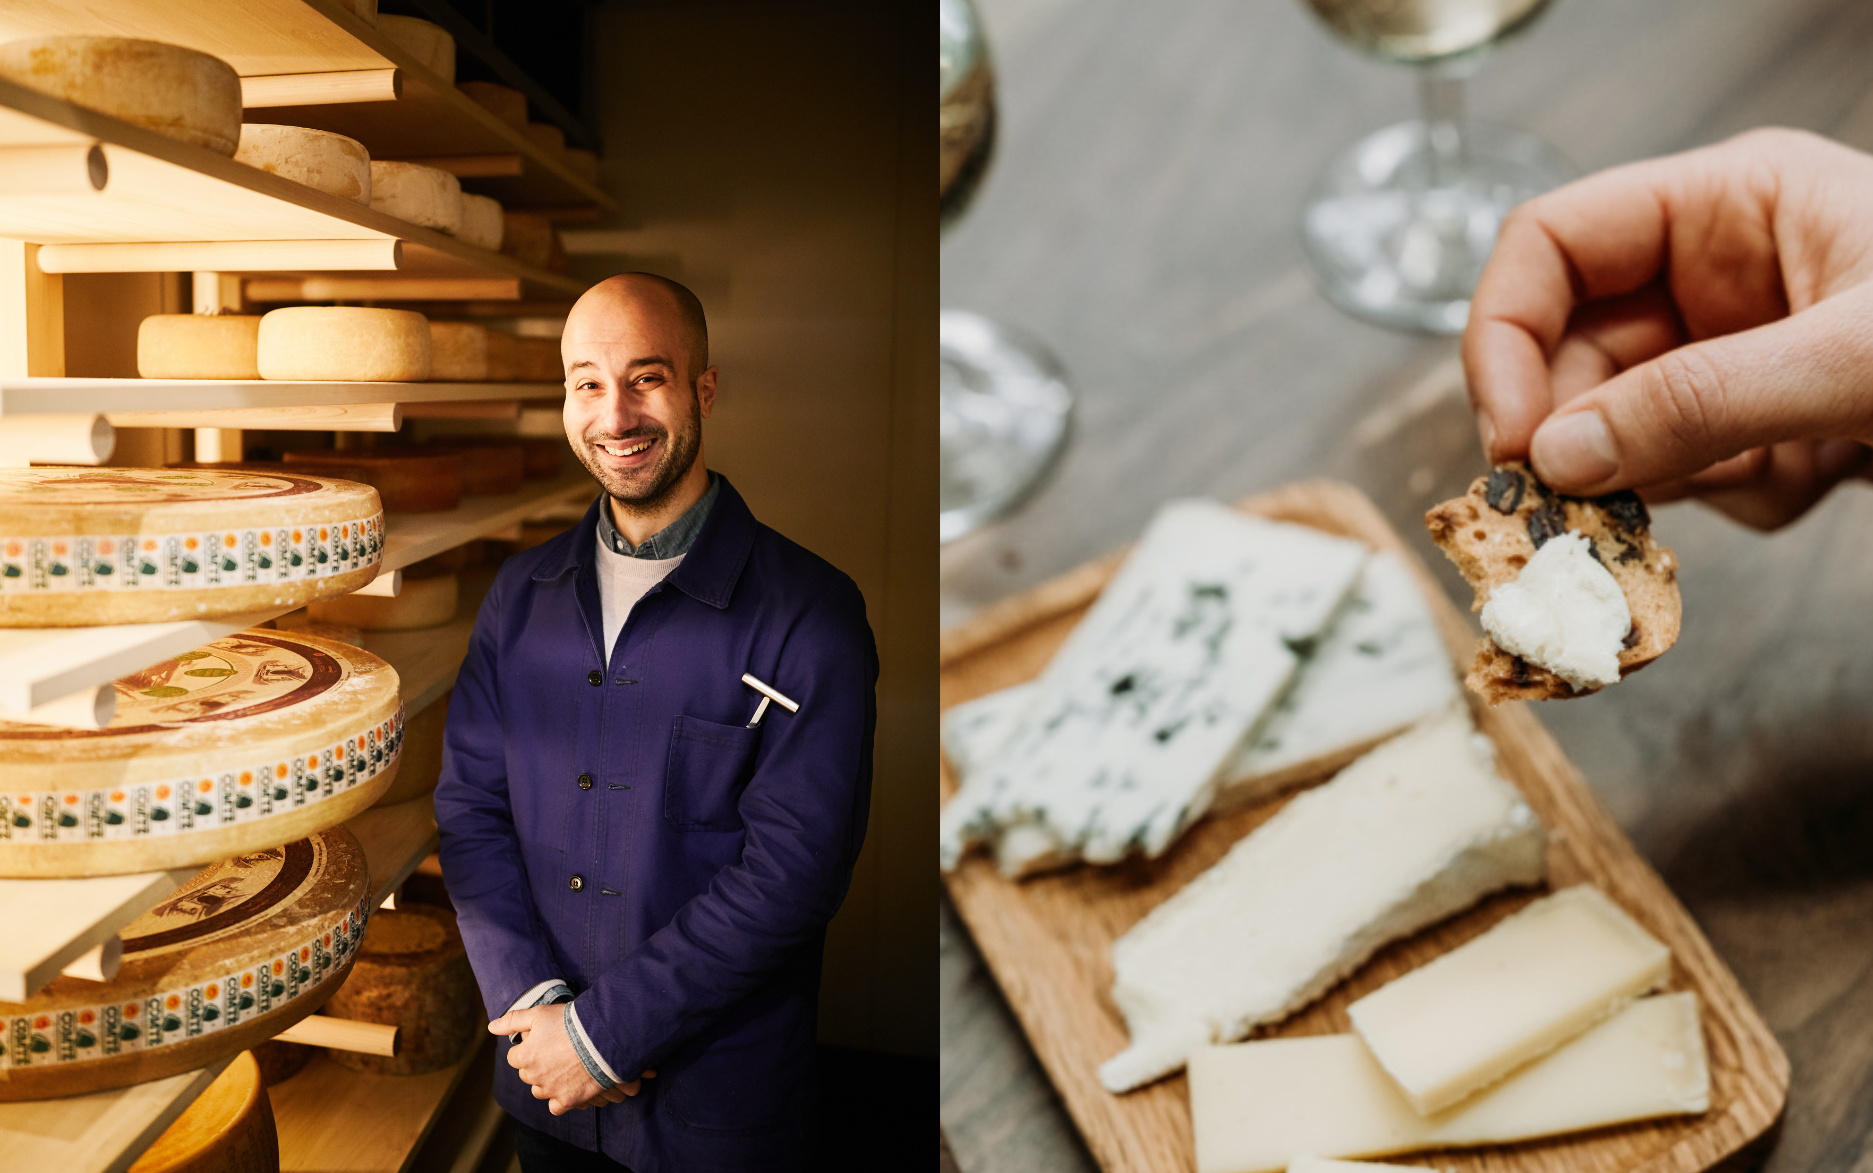 anthony and cheese MAKER MONGER dmtd 24.png